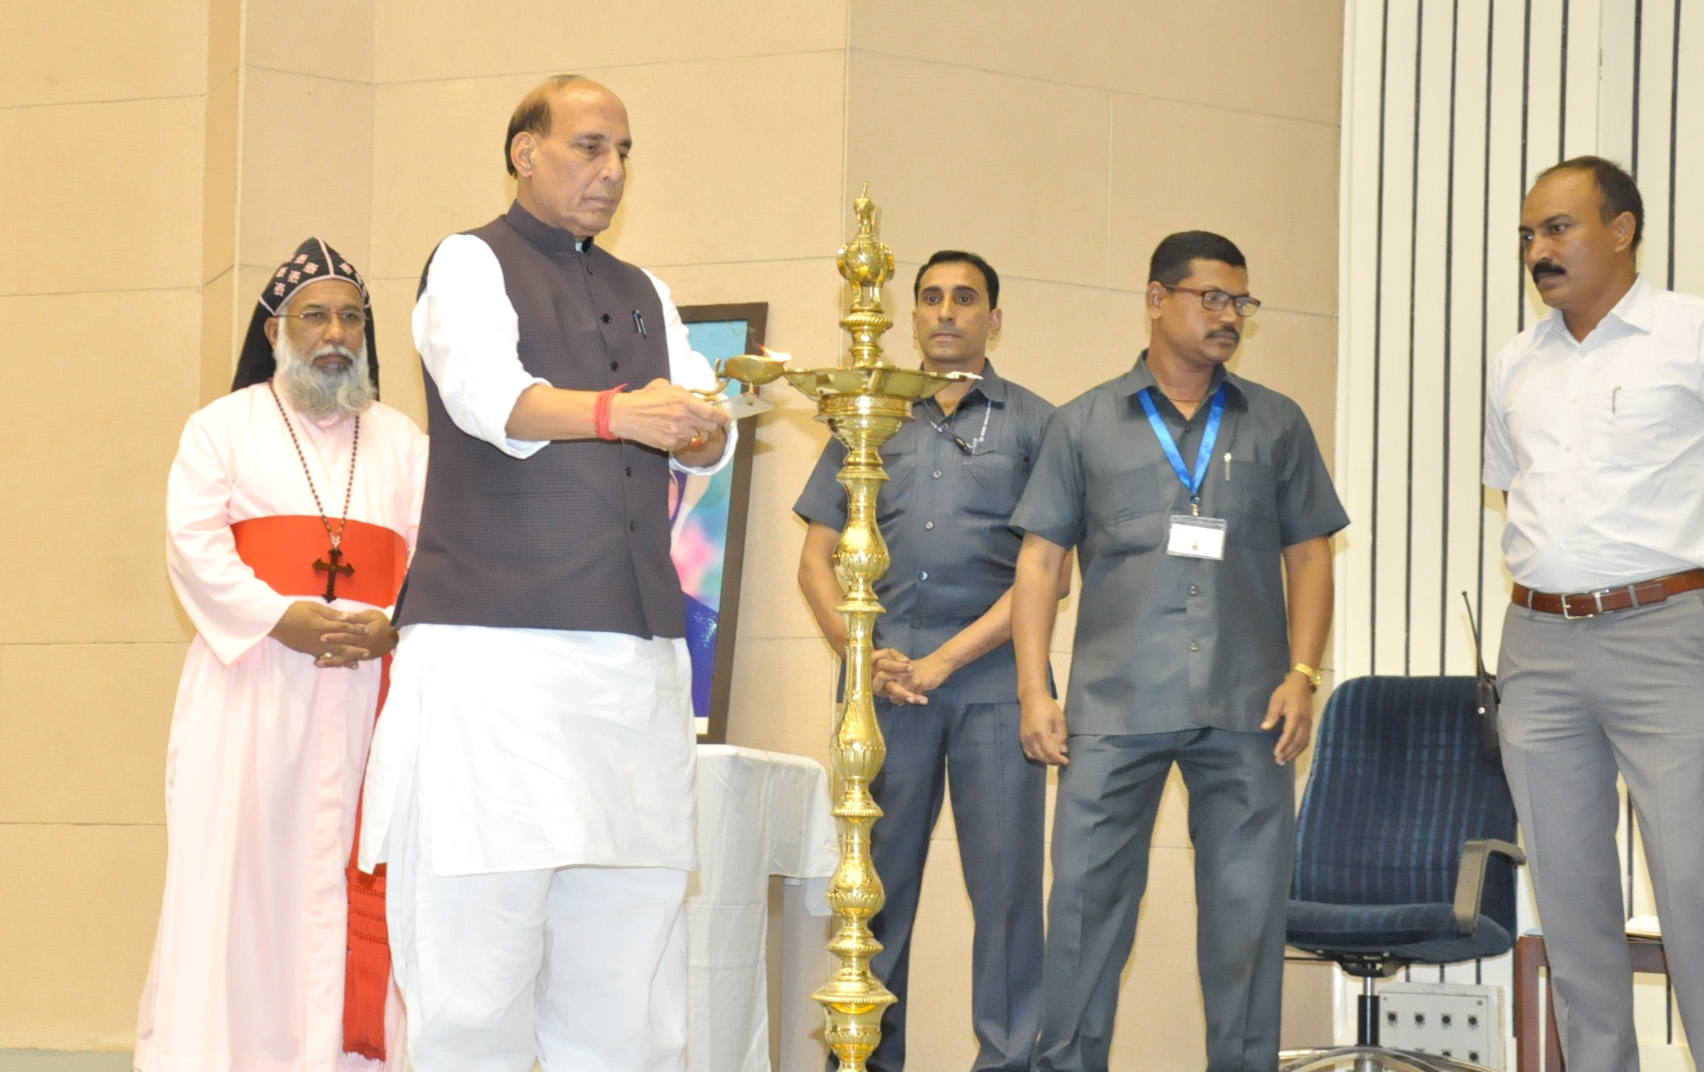 The Union Home Minister, Shri Rajnath Singh inaugurating the celebration to commemorate the Canonization of Saint Mother Teresa, in New Delhi on October 19, 2016.